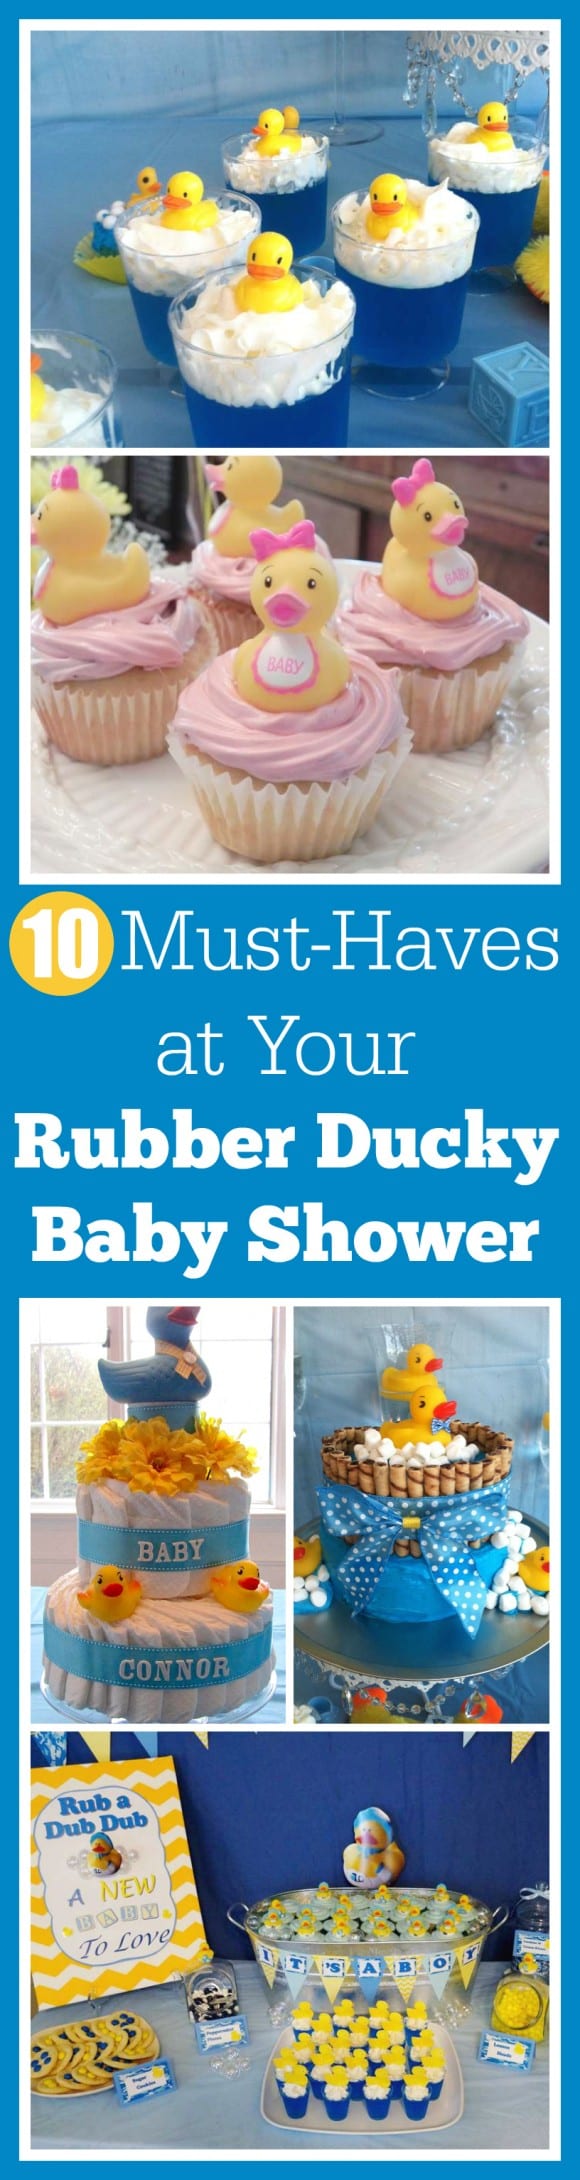 10 Must-Haves at Your Rubber Ducky Baby Shower | CatchMyParty.com